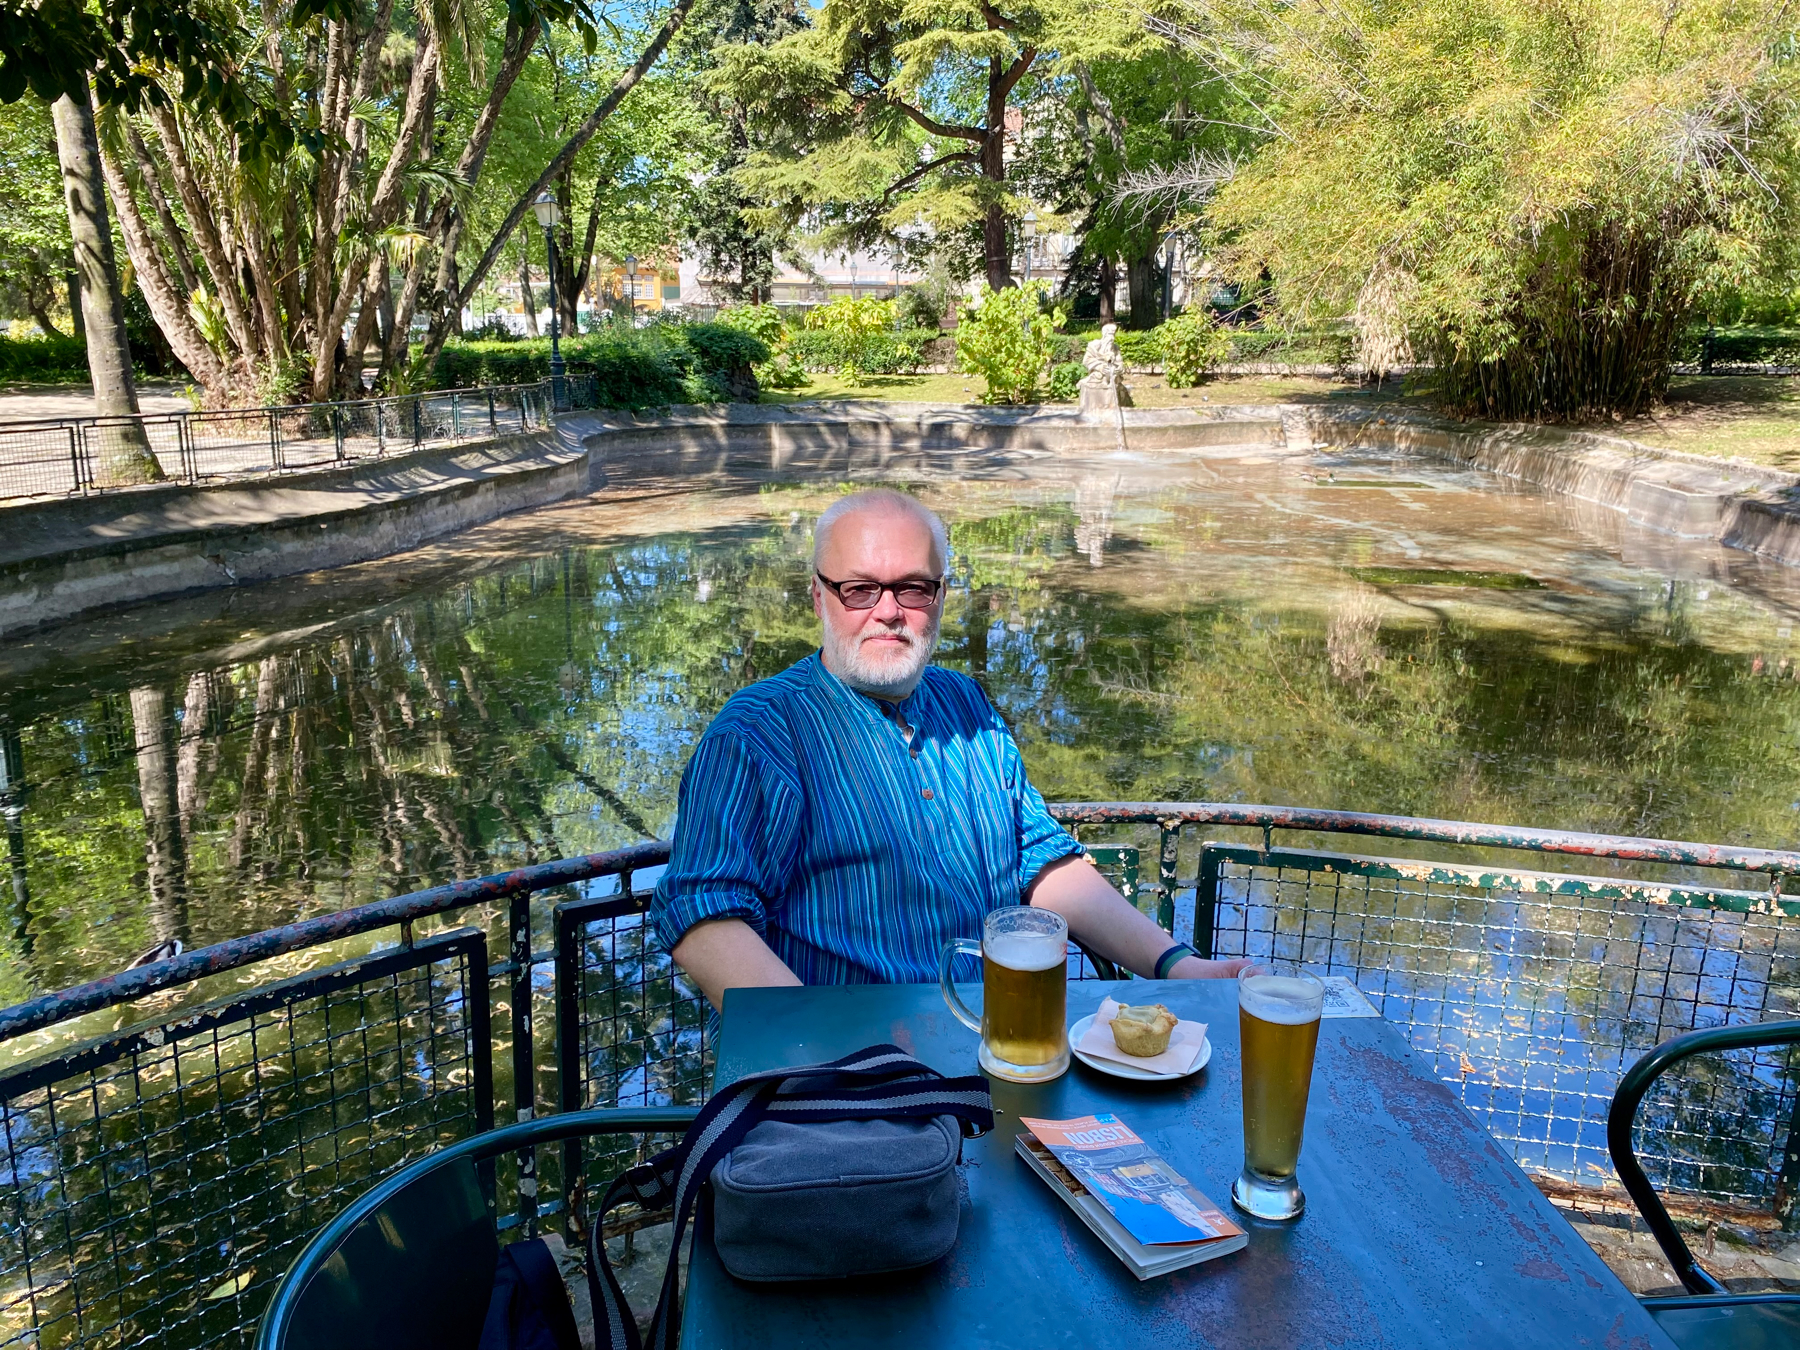 Man seated at a table with beers and a small pie. In a park, pond in background